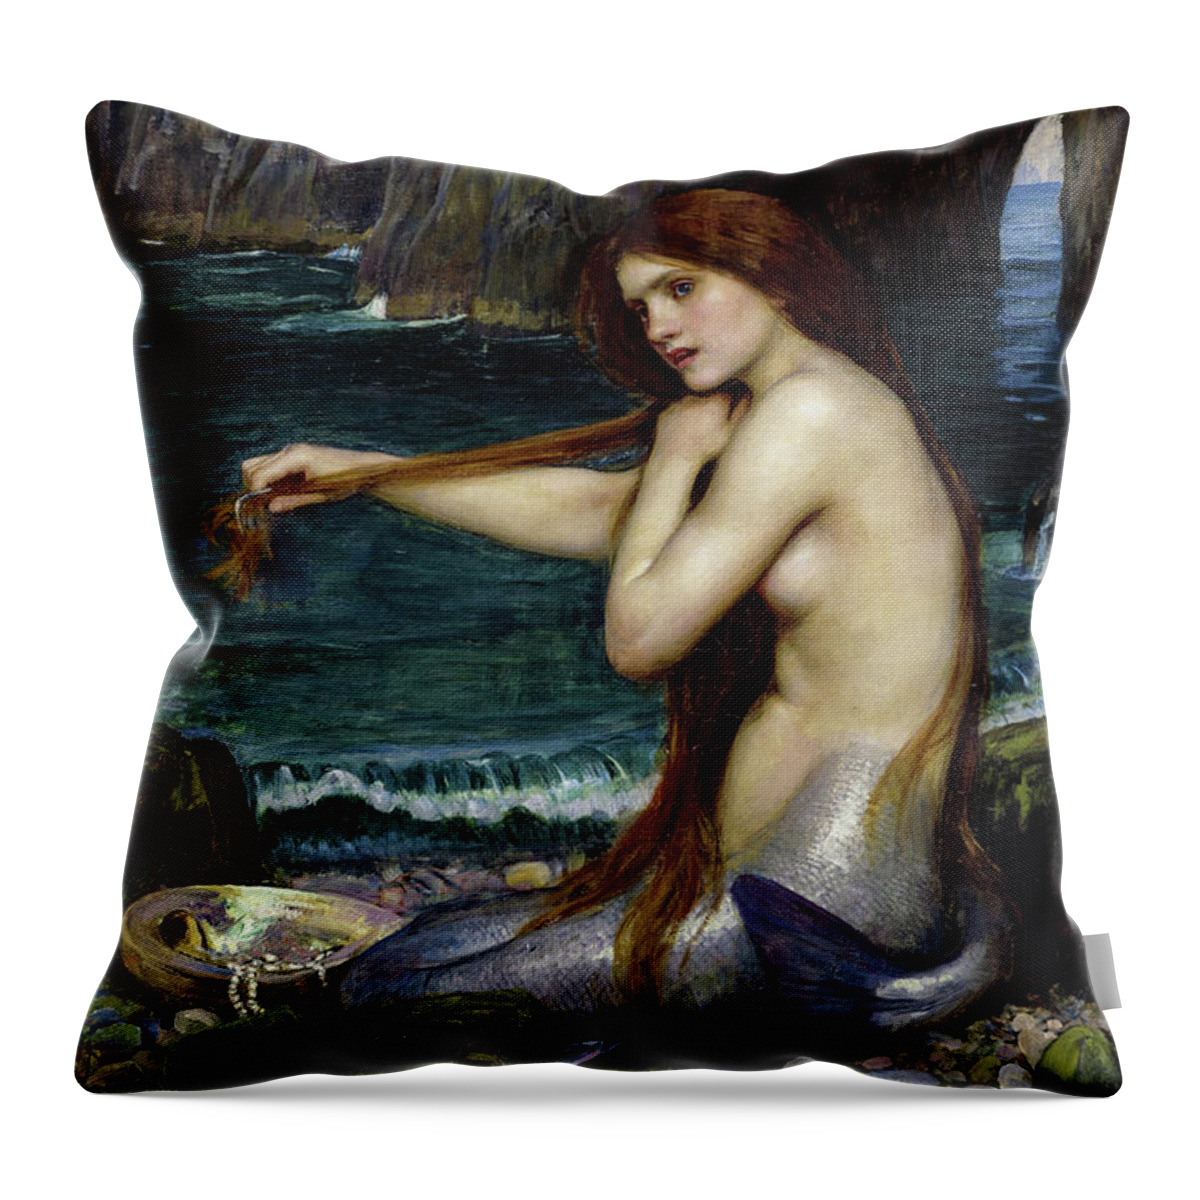 Mermaid Throw Pillow featuring the painting A Mermaid by John William Waterhouse